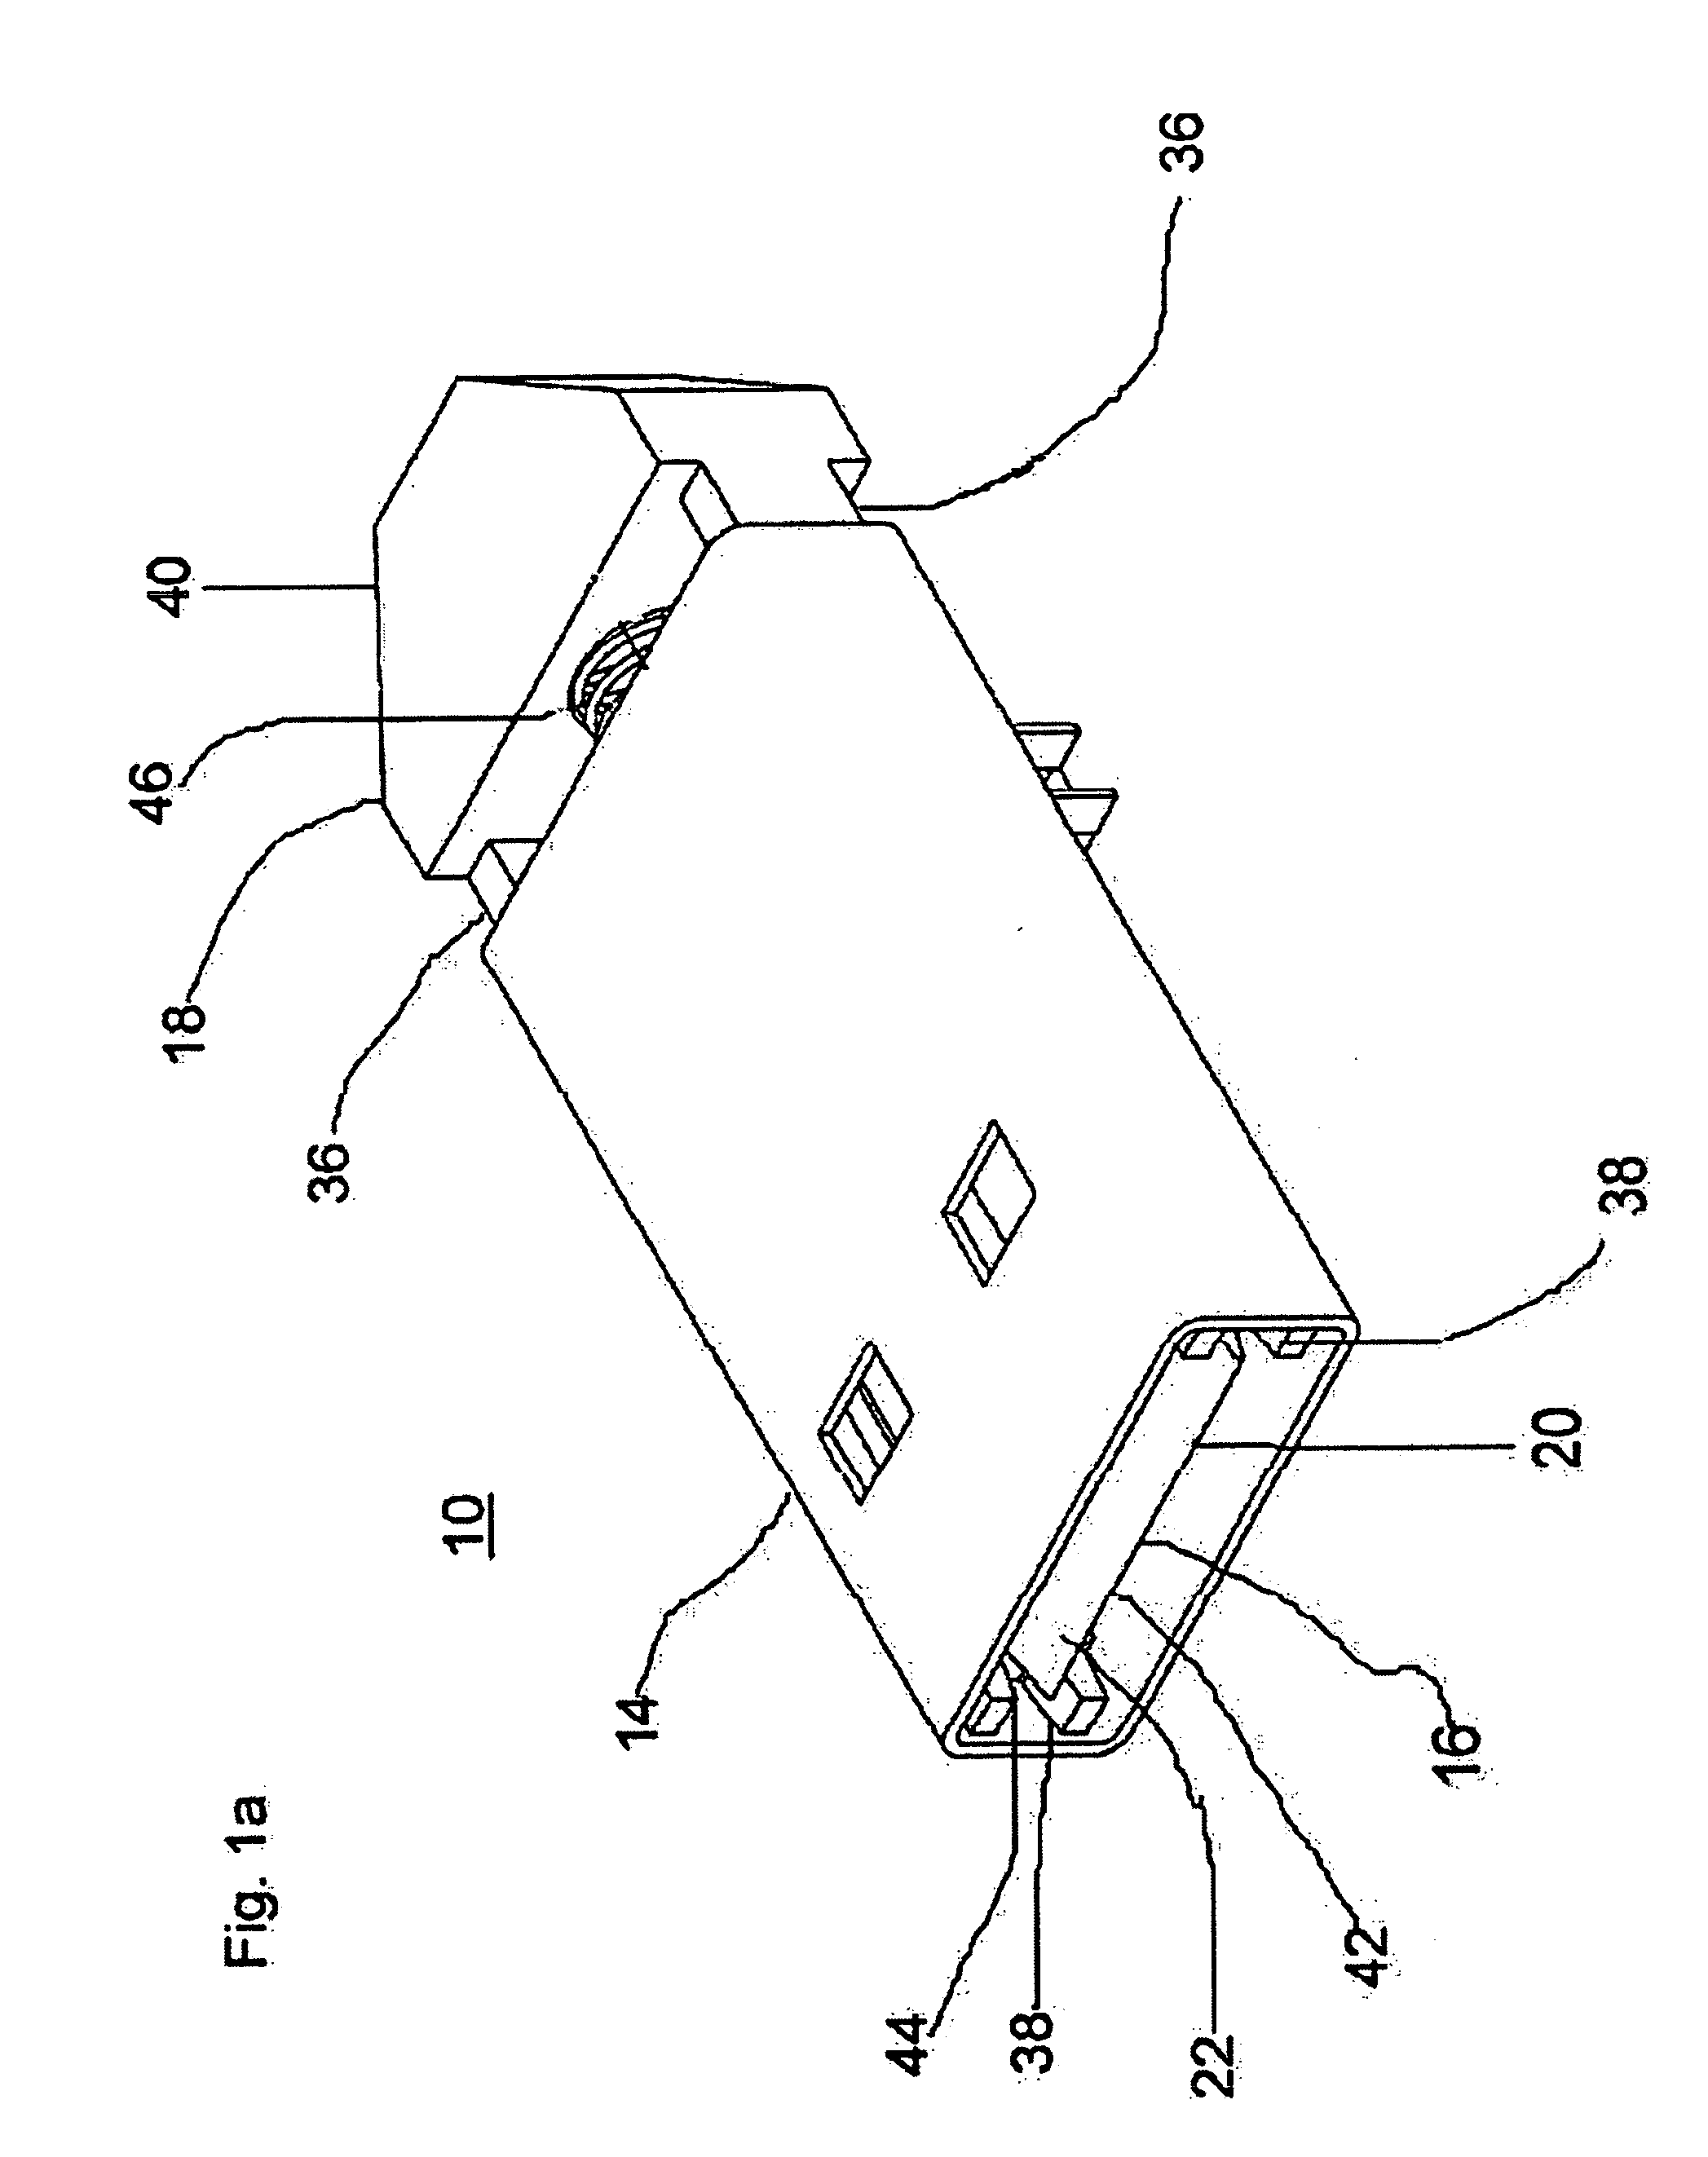 Reversible universal serial bus (USB) device and connector